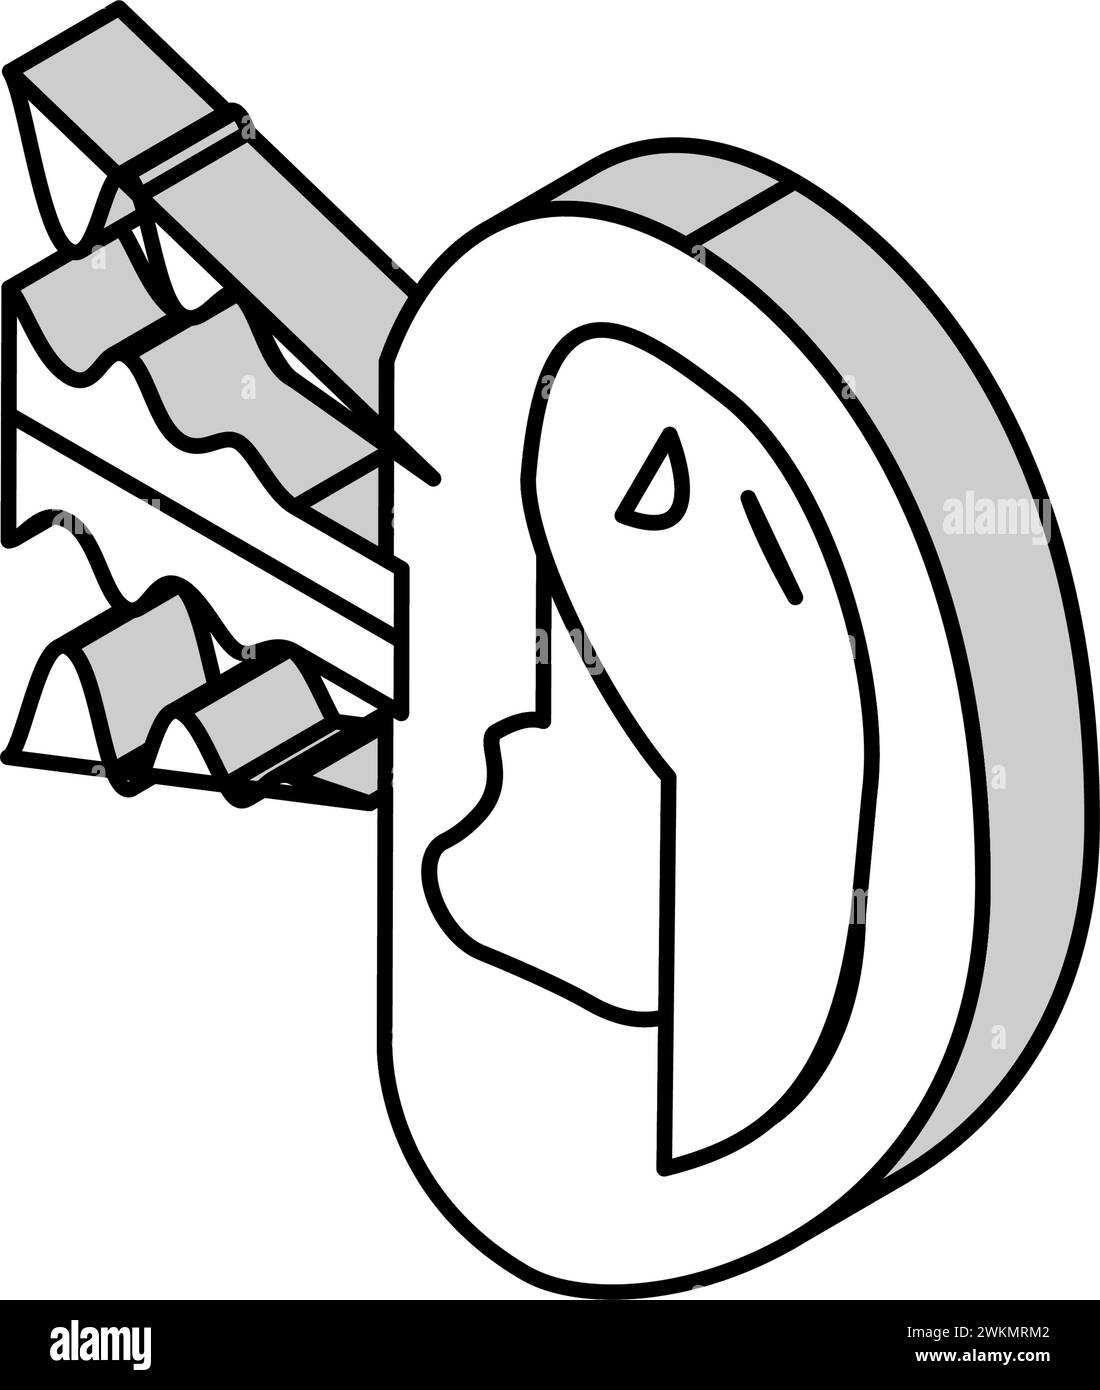 noise reduction audiologist doctor isometric icon vector illustration Stock Vector